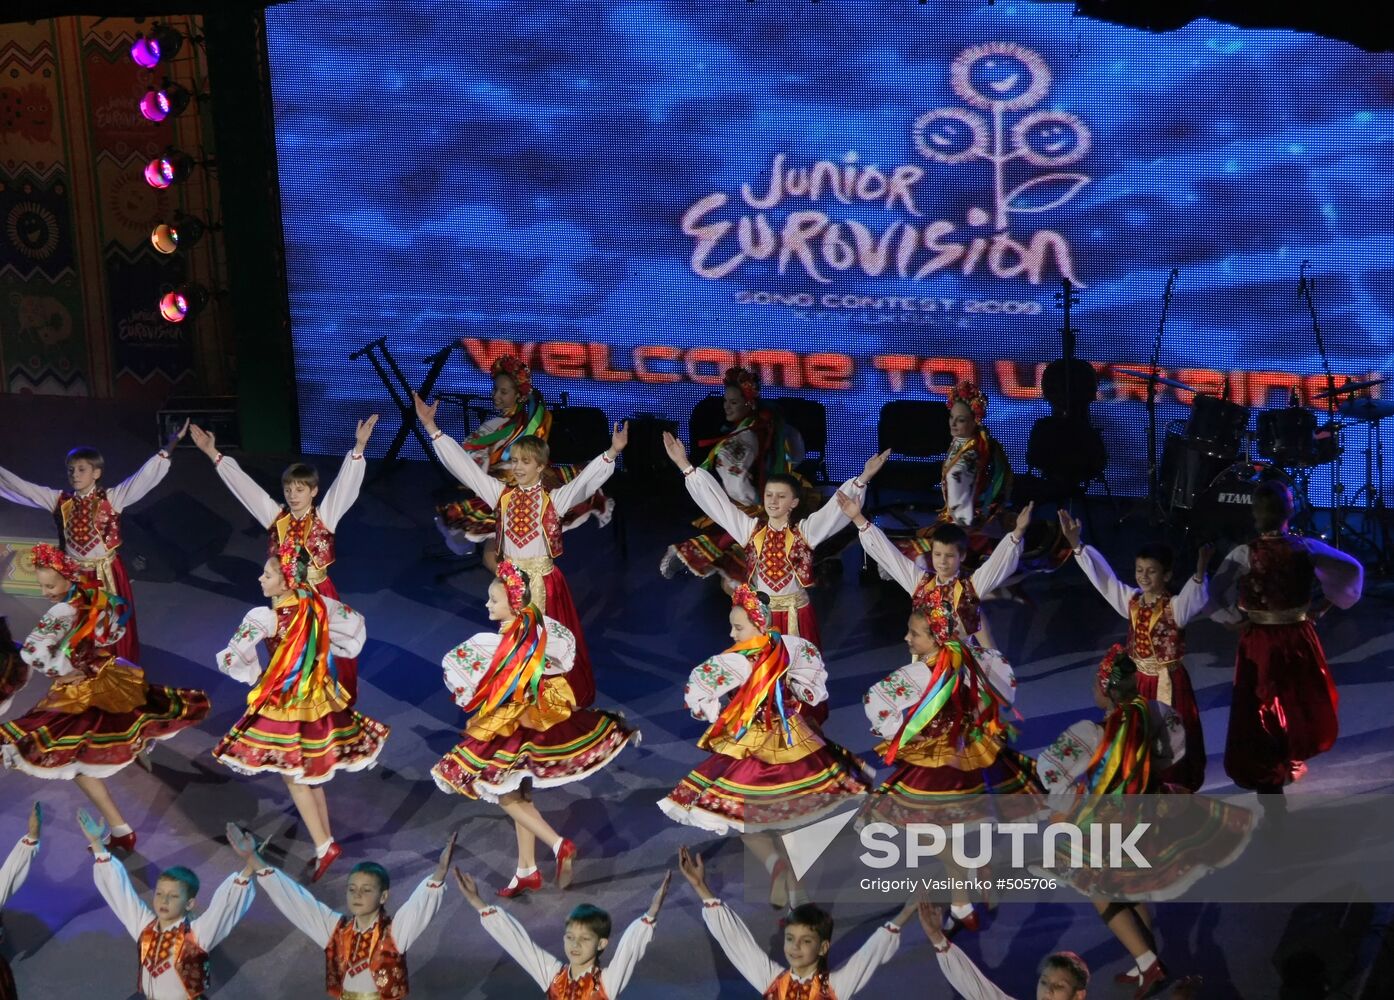 Junior Eurovision Song Contest opened in Kiev